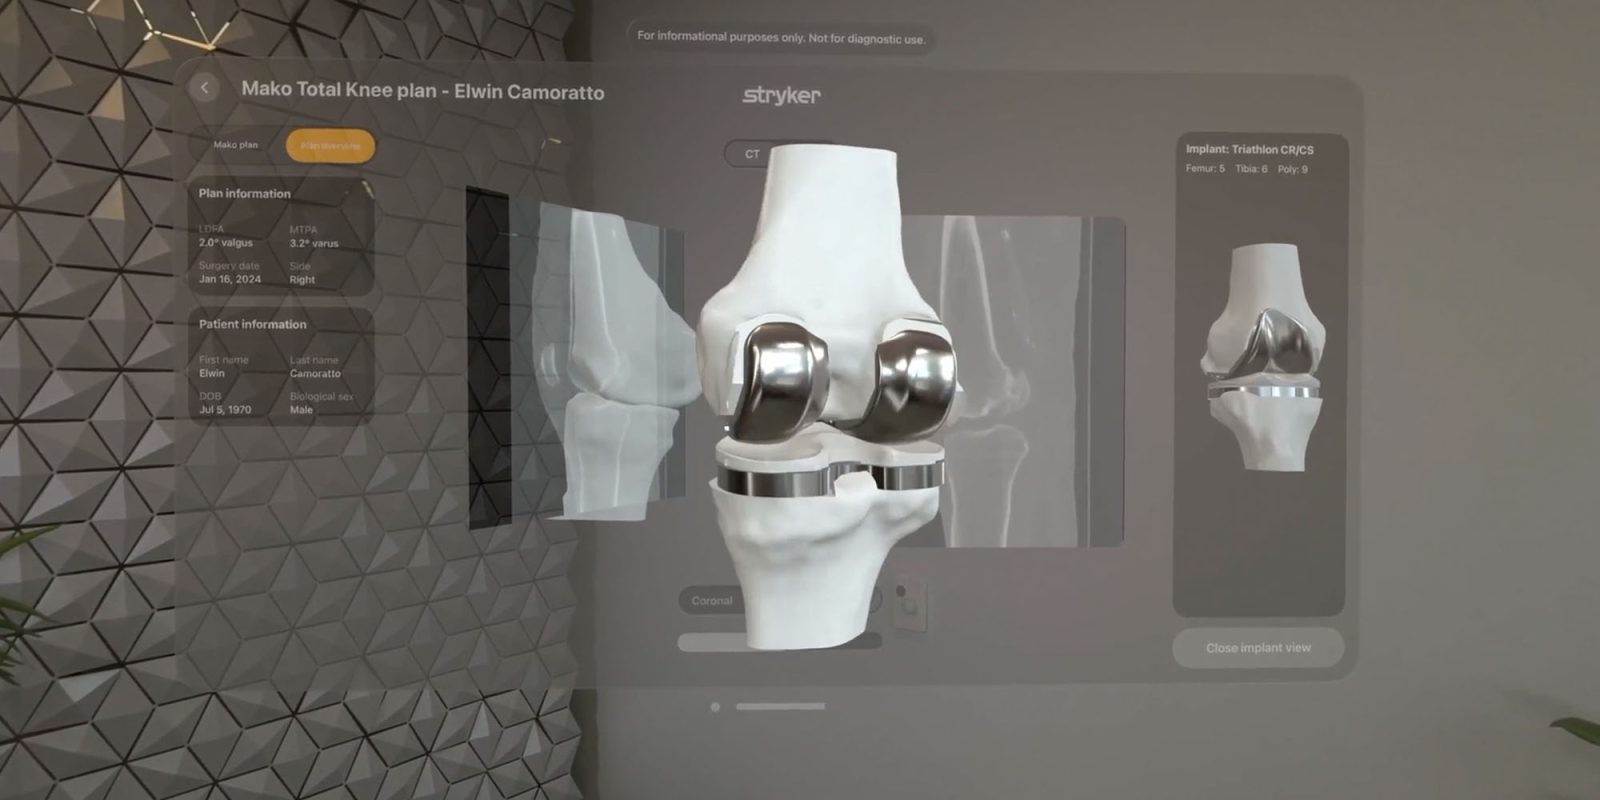 Vision Pro helps surgeons plan and visualize operations | Knee surgery visualization shown